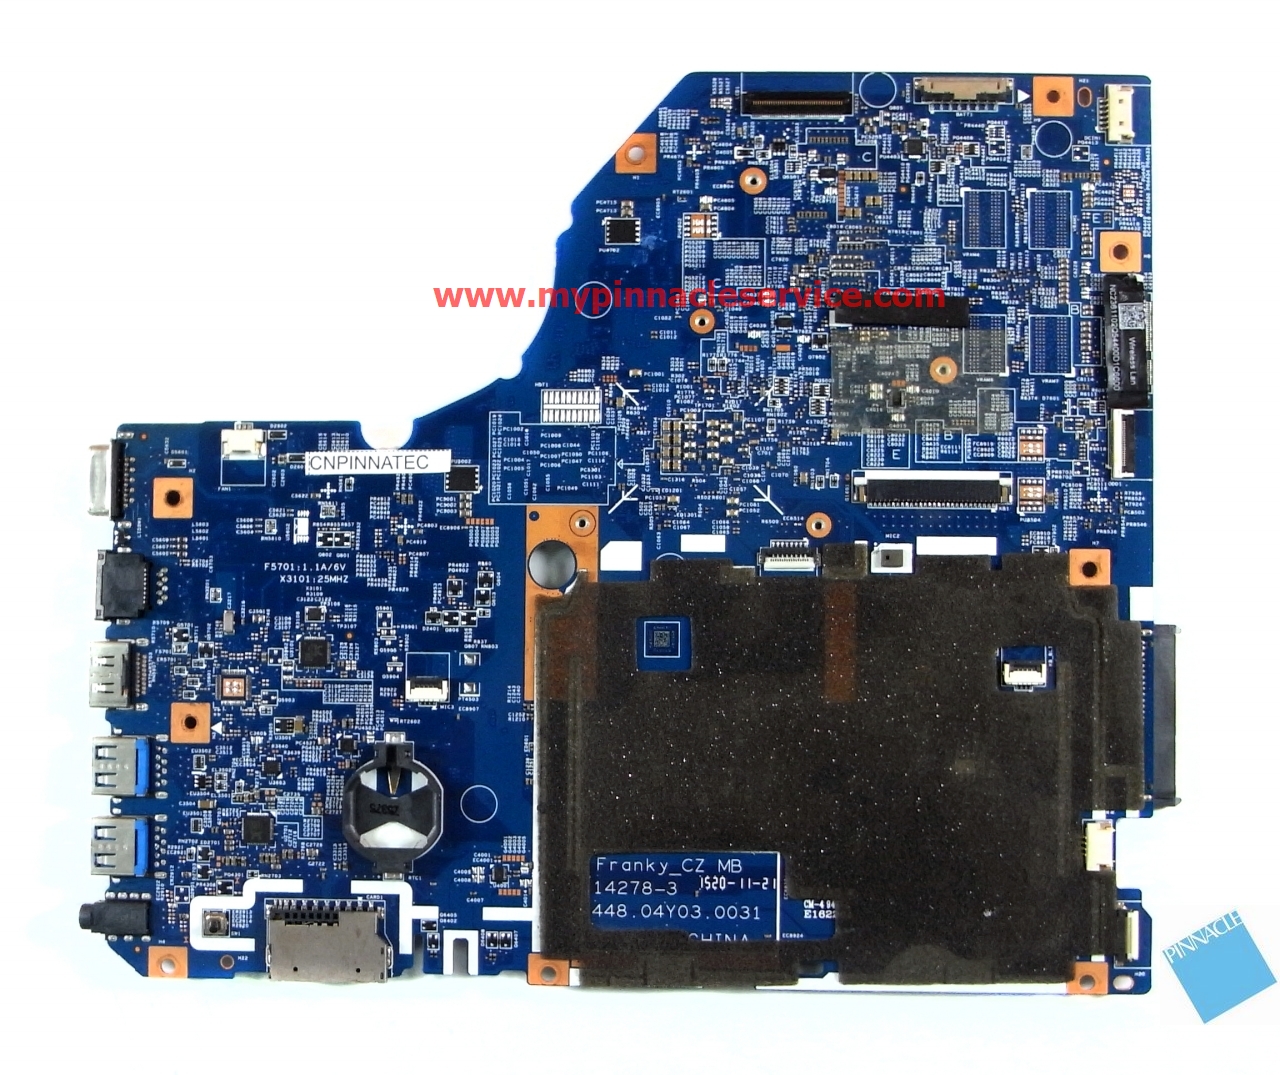 nbmym11004-a10-8700p-motherboard-for-acer-aspire-e5-752g-448.04y03.0031-rimg0059.jpg